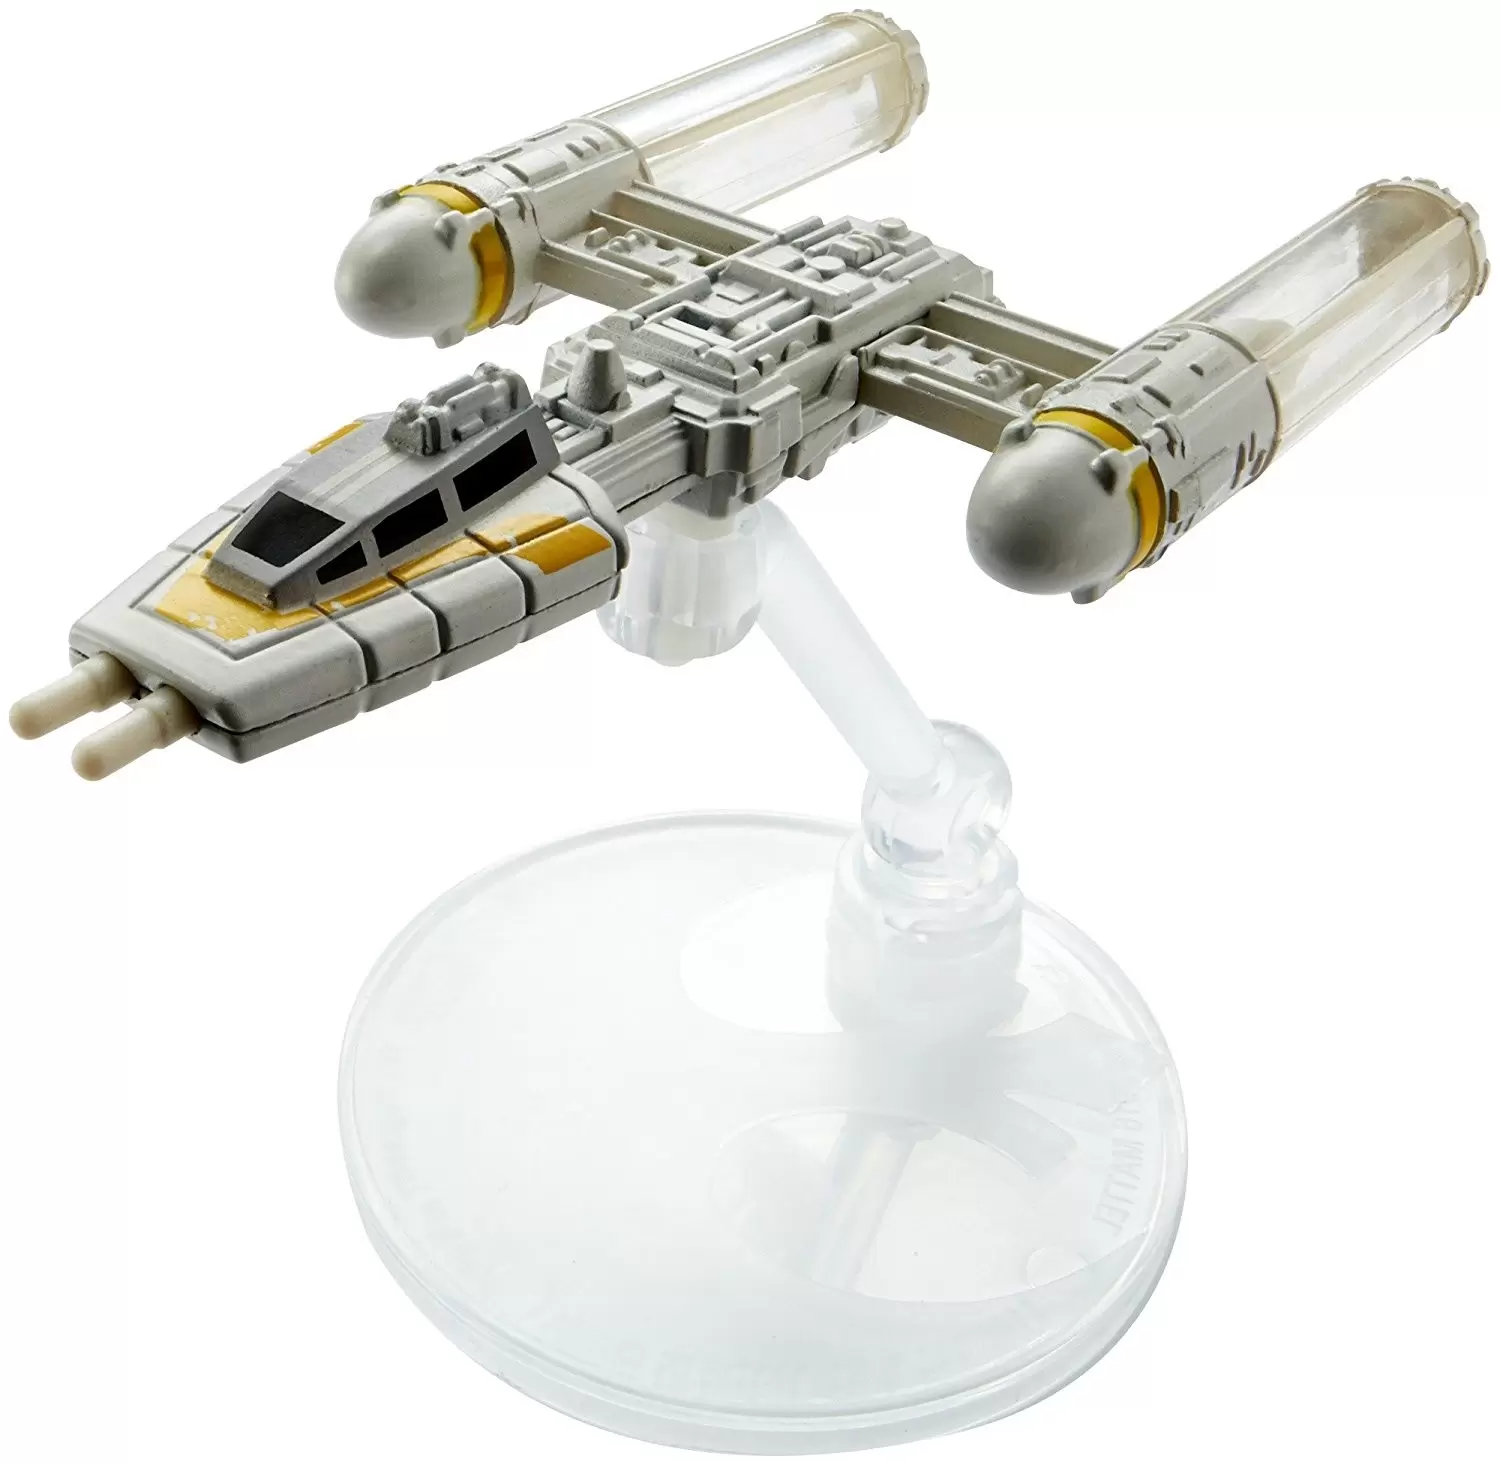 Die Cast Vehicle - Hot Wheels Star Wars - Y-wing Figther (Gold Leader)